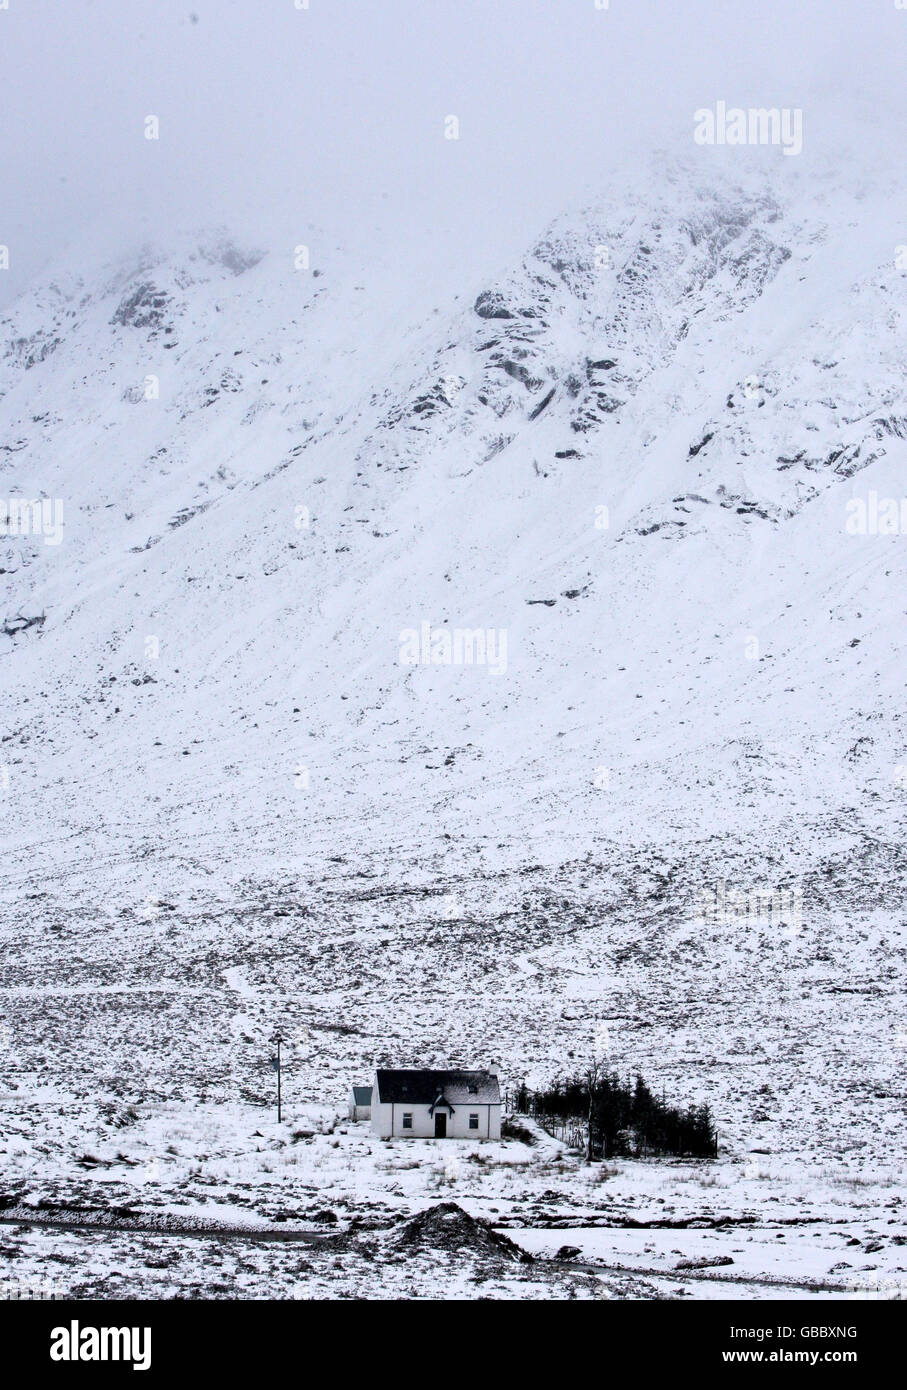 Members of the climbing party who were involved in yesterdays avalanche tragedy leave a cottage at the foot of the mountain Buchaille Etive Mor, Glencoe. Three climbers died following an avalanche on the mountain. Stock Photo